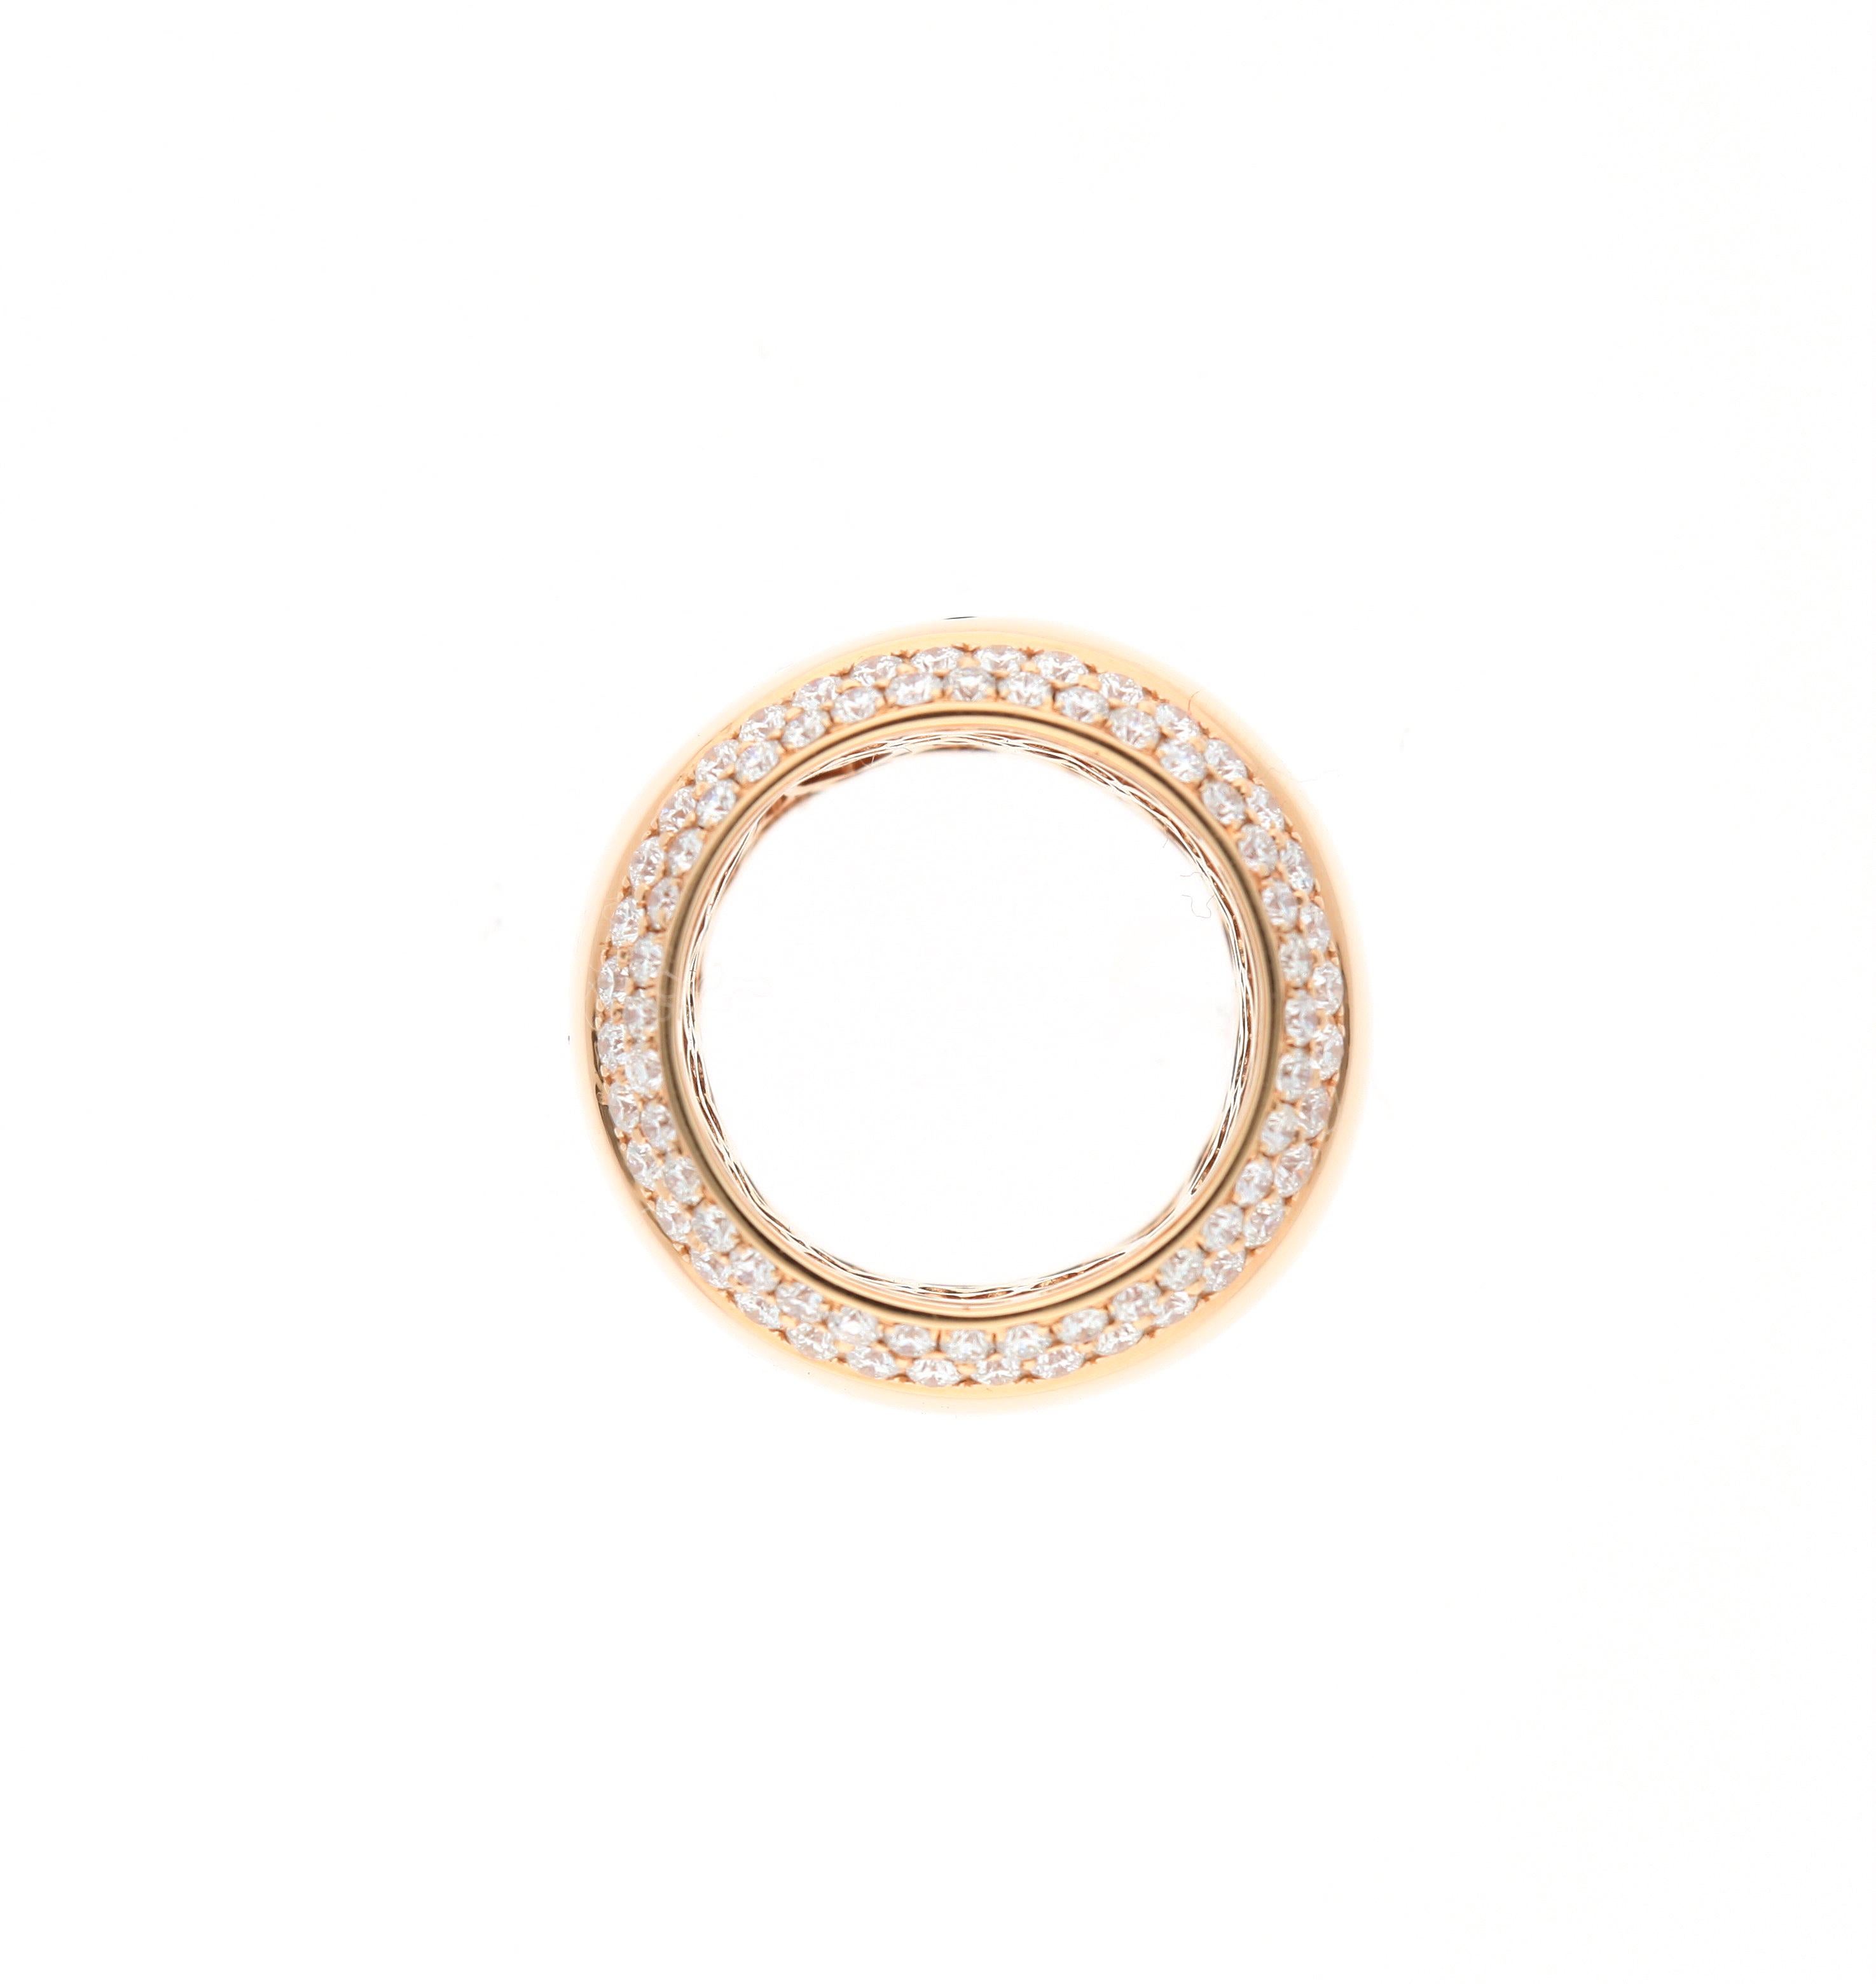 18 Karat Rose Gold Band Ring with Diamonds Total Weight 3.39 Carat For Sale 4